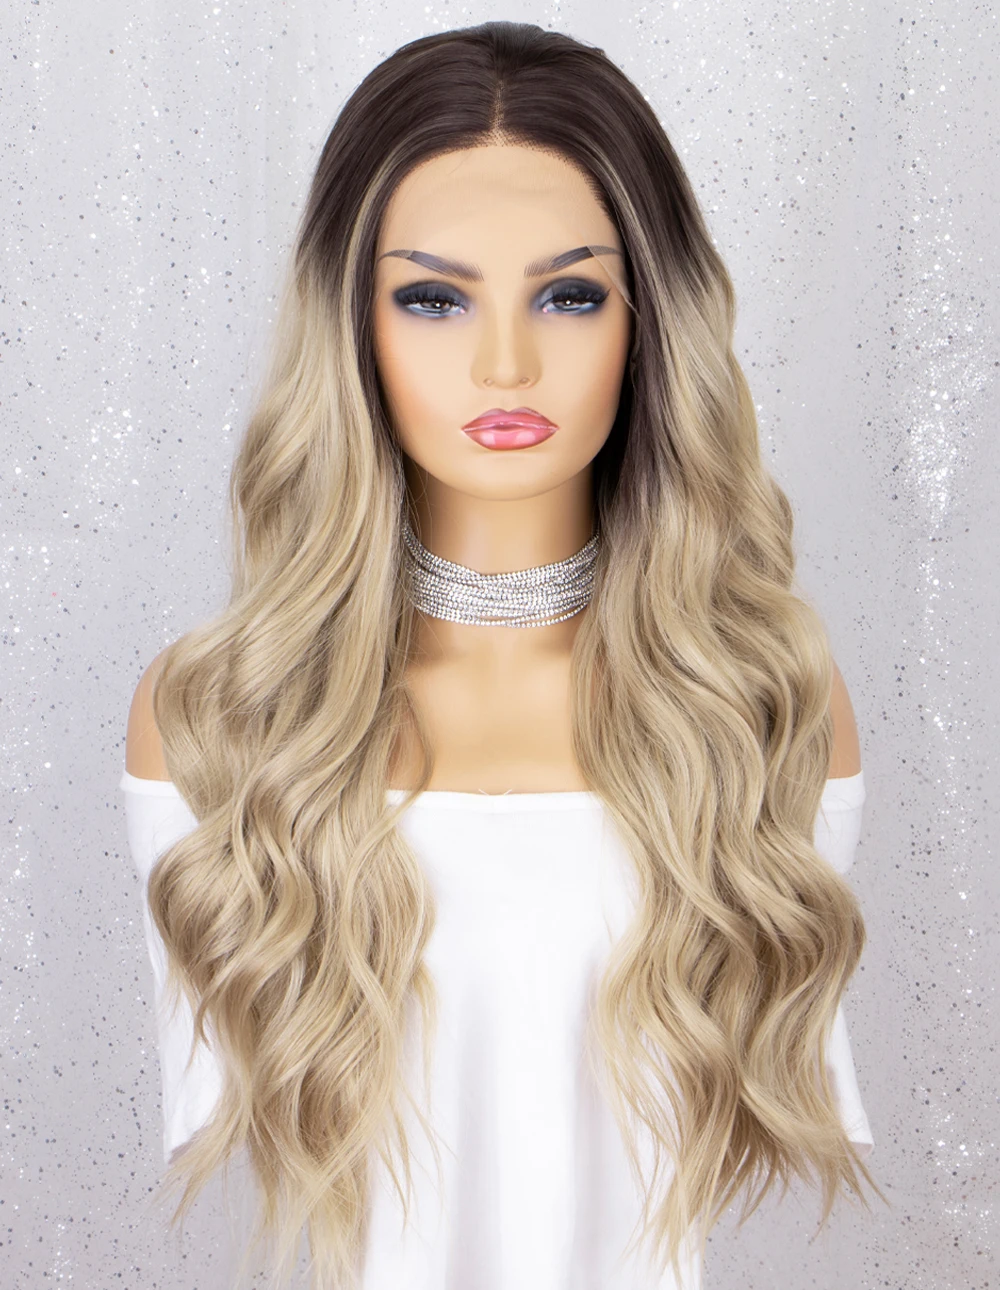 Kryssma Ombre Blonde Synthetic Lace Front Wig For Women 24inch Long Wave Wig With Baby Hair Daily Use Party Cosplay Wig